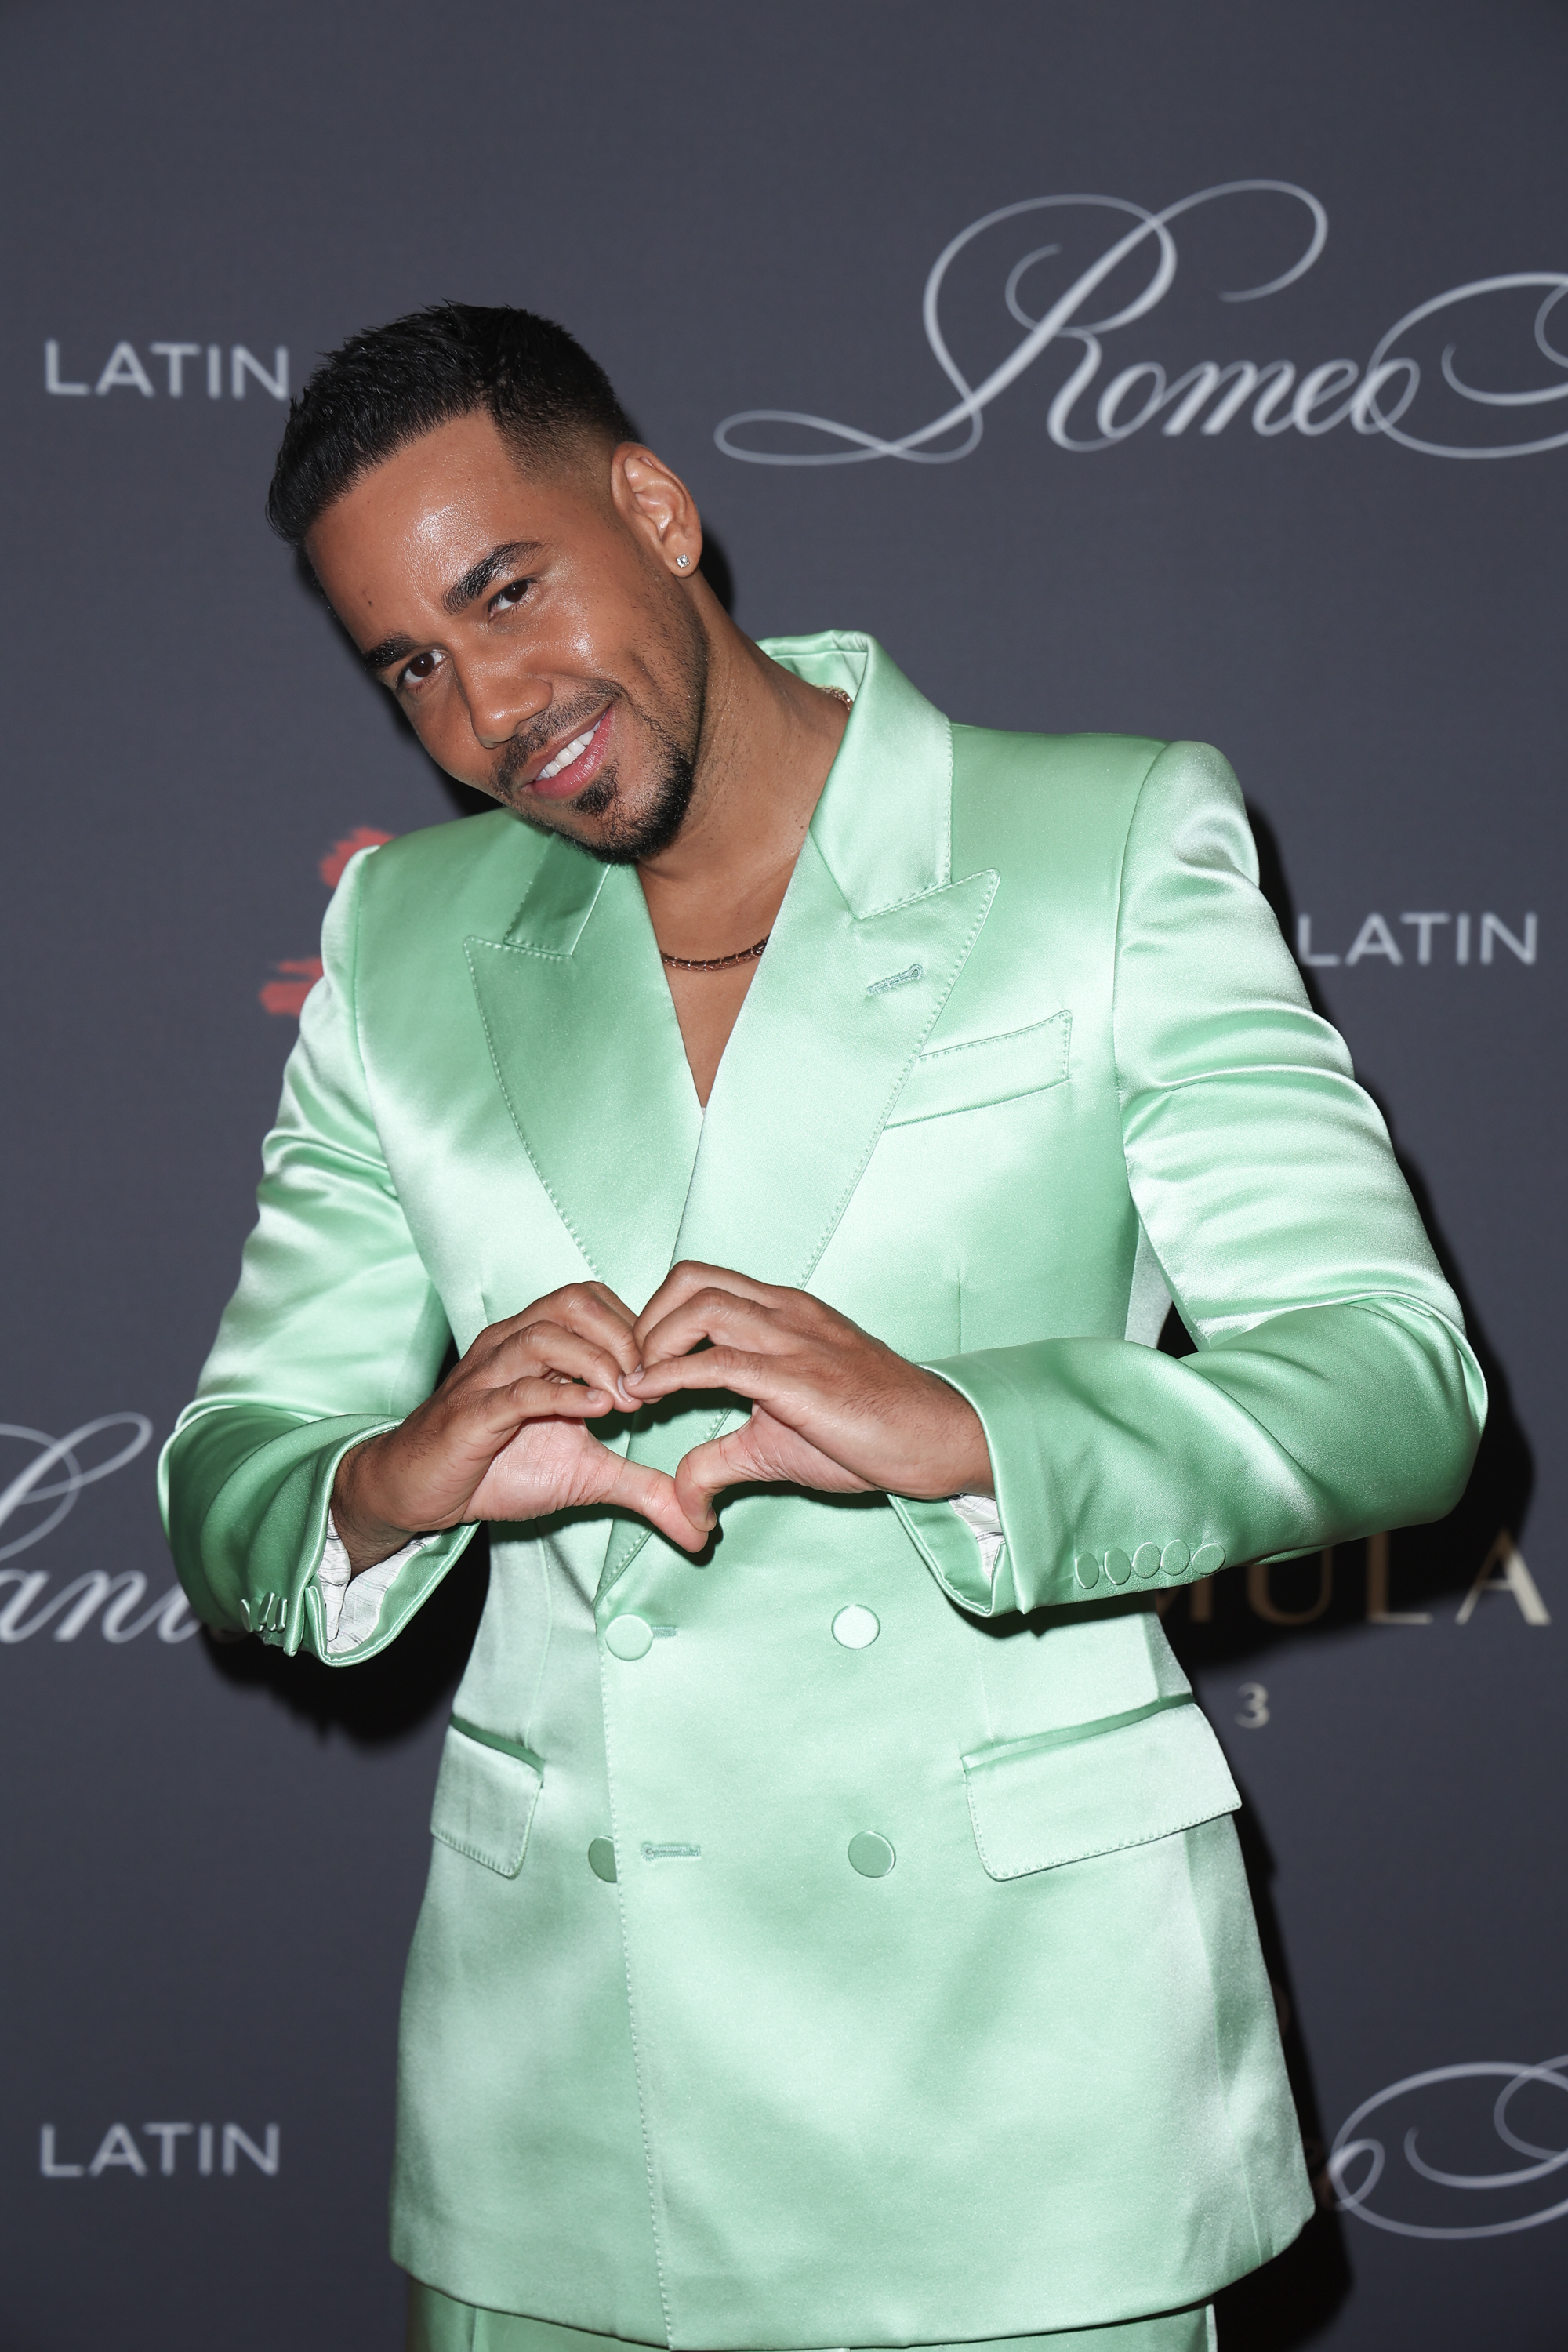 Romeo Santos attends the "Formula Vol. 3" Album Release Party on September 1, 2022, in Miami Beach, Florida. | Source: Getty Images